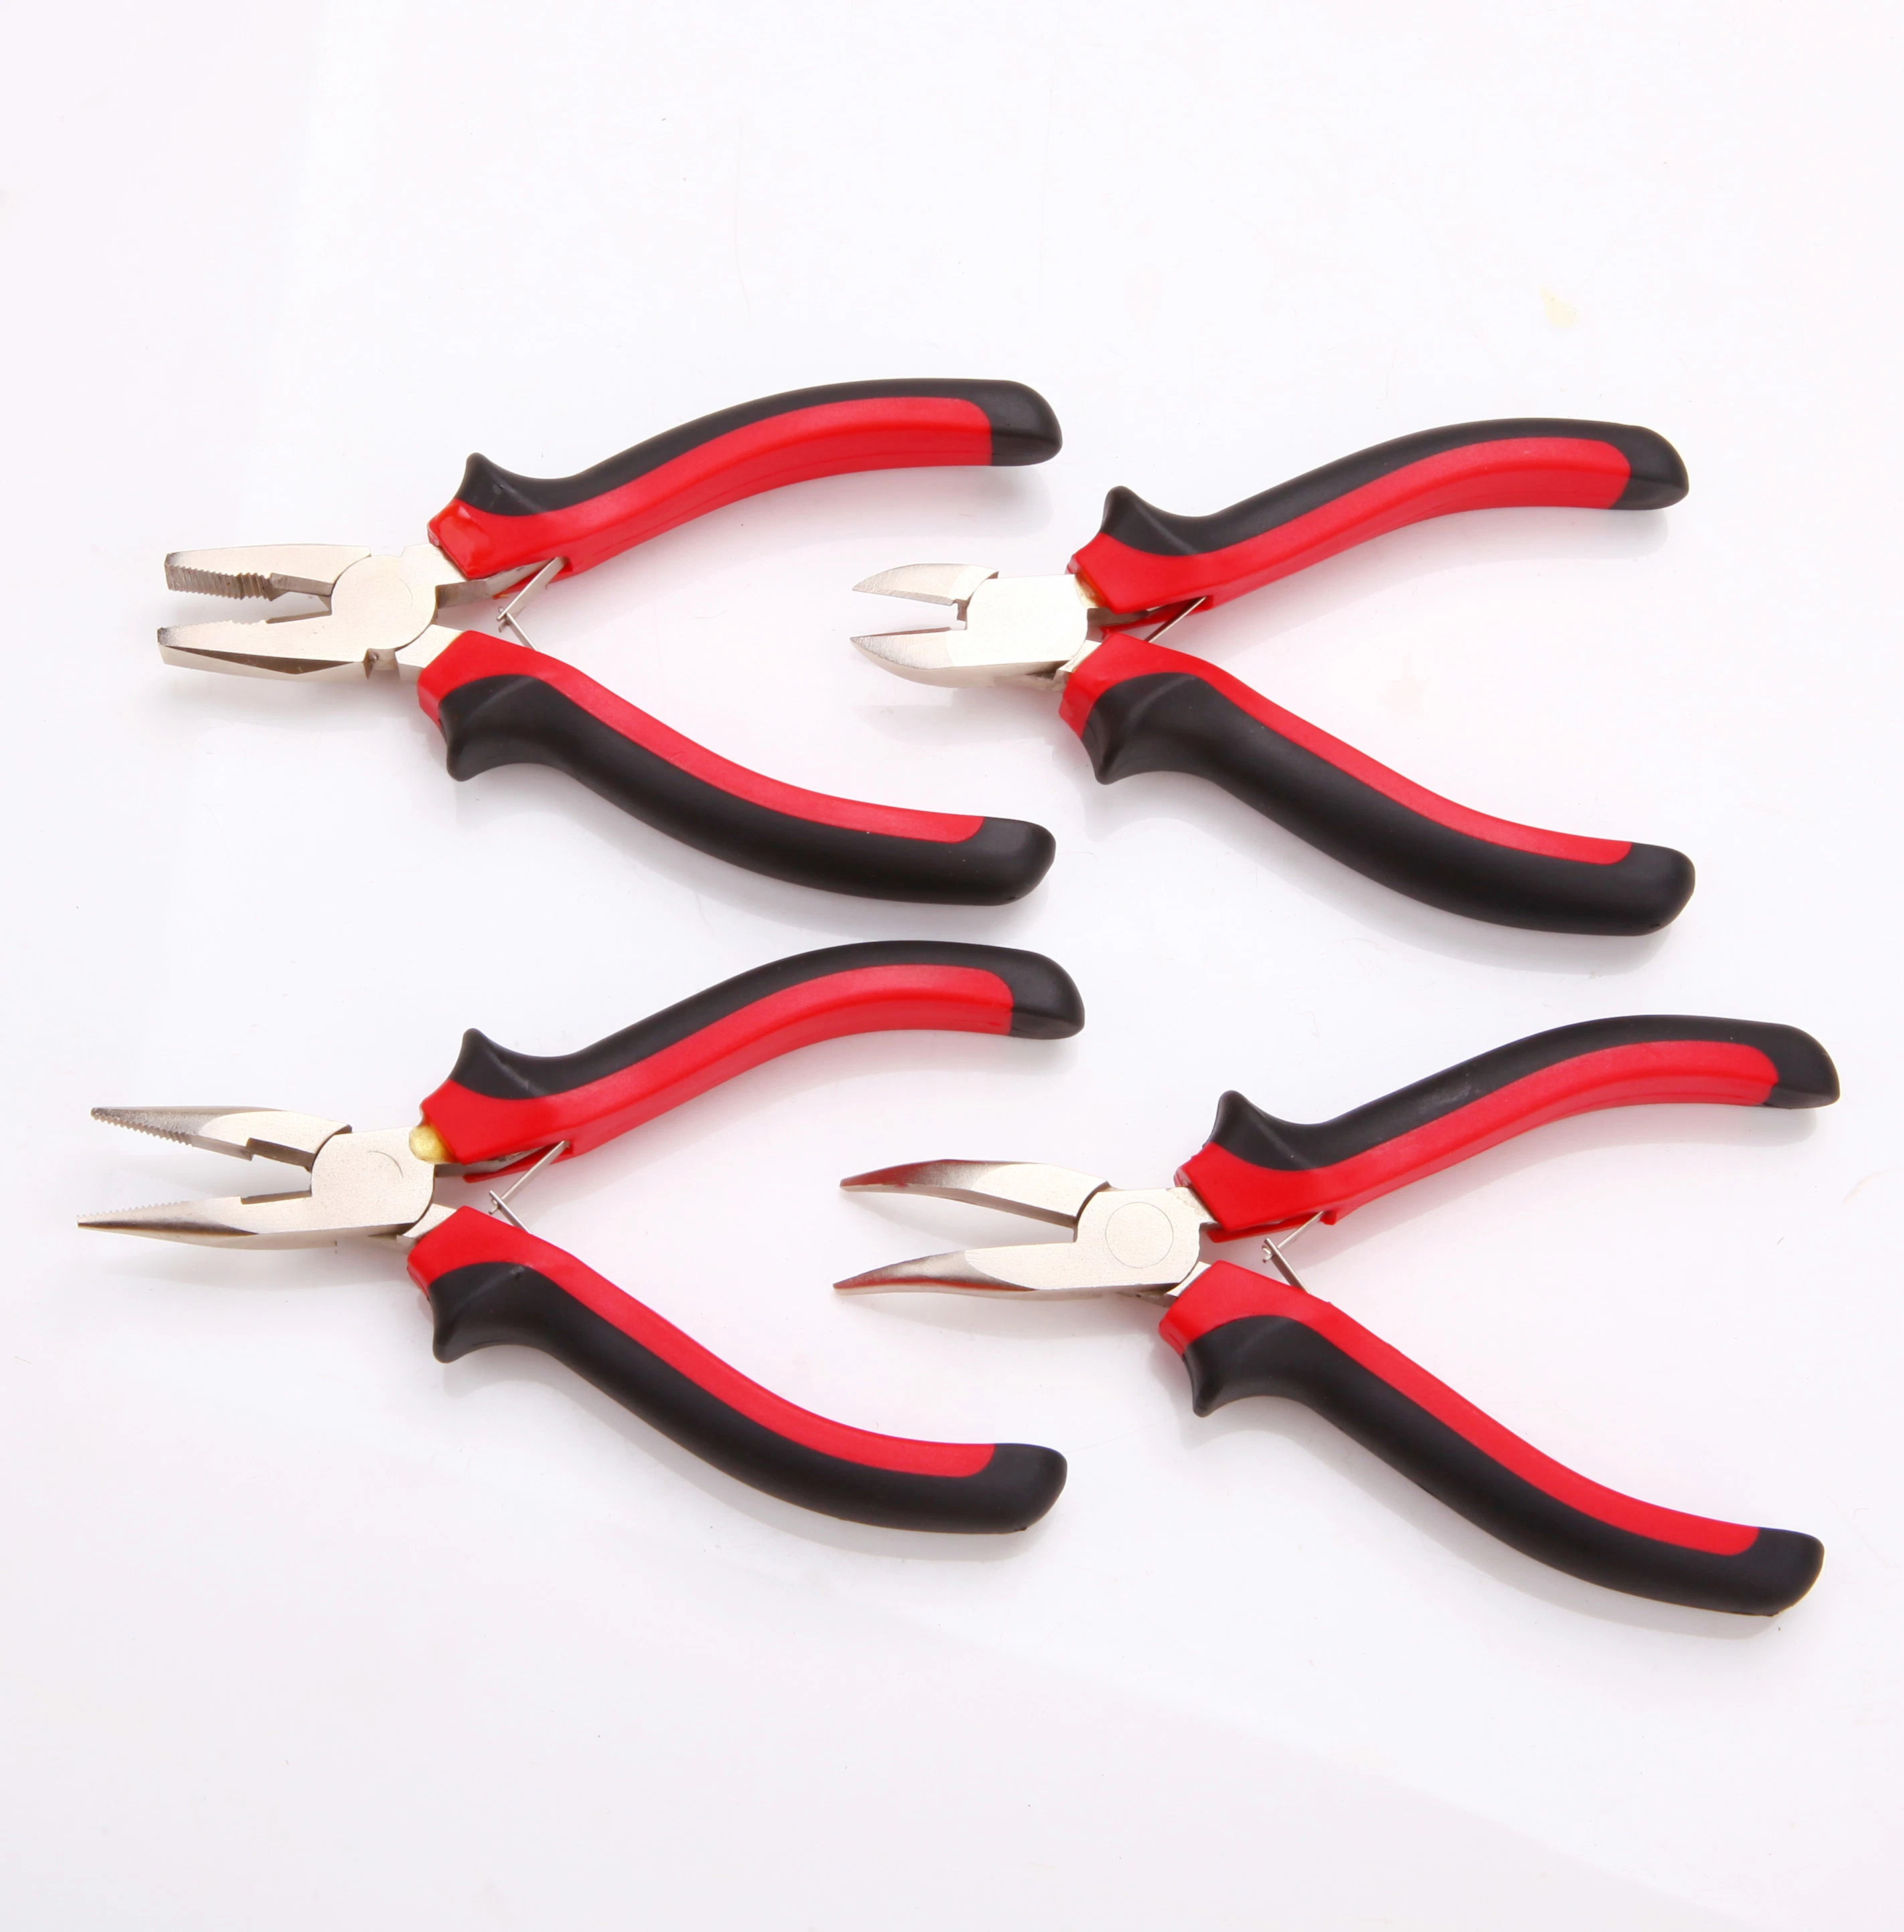 Professional Mini Pliers, Hand Tools, Hardware Tools, CRV or Carbon Steel, Dipped Handle, PVC Handle, Polish, Nickel Plated, 4.5", 5", 5.5"